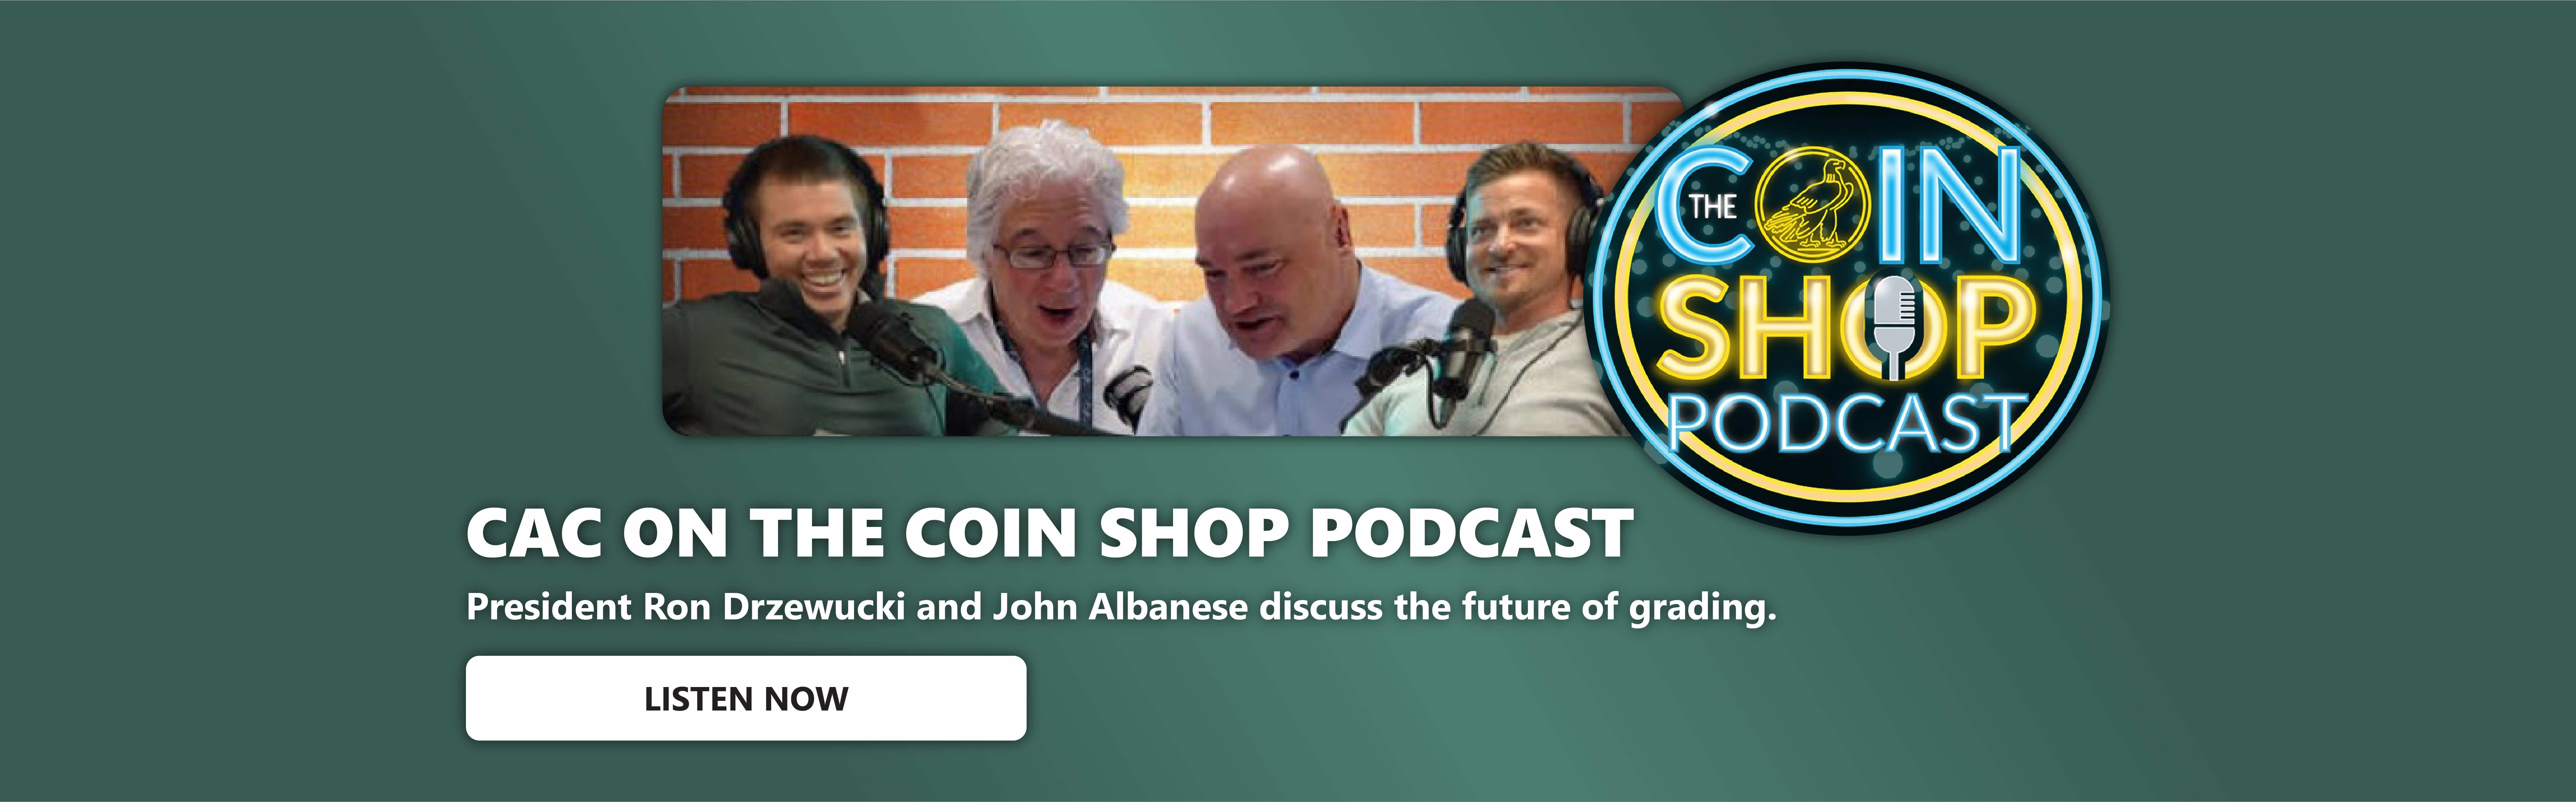 CAC on the Coin Shop Podcast